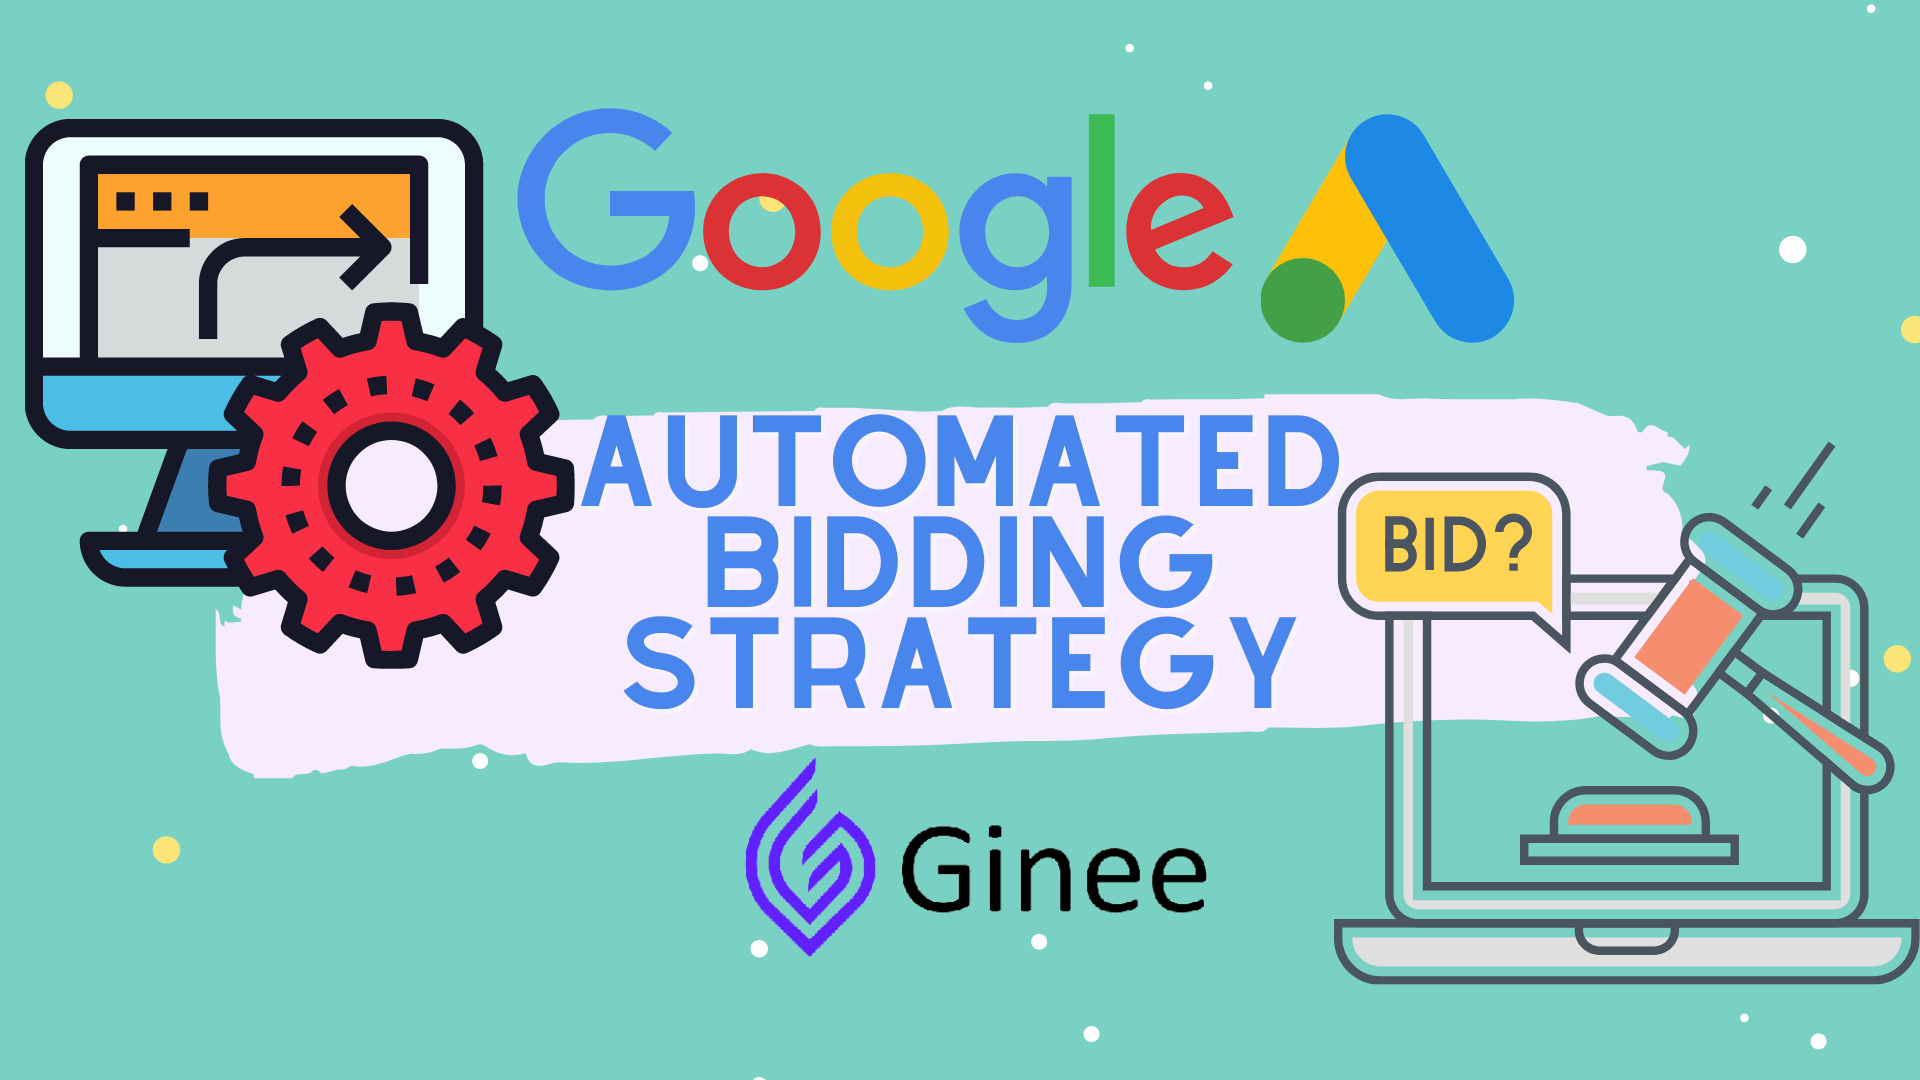 bark kedelig ur What Is Automated Bidding Strategy And Its Function - Ginee